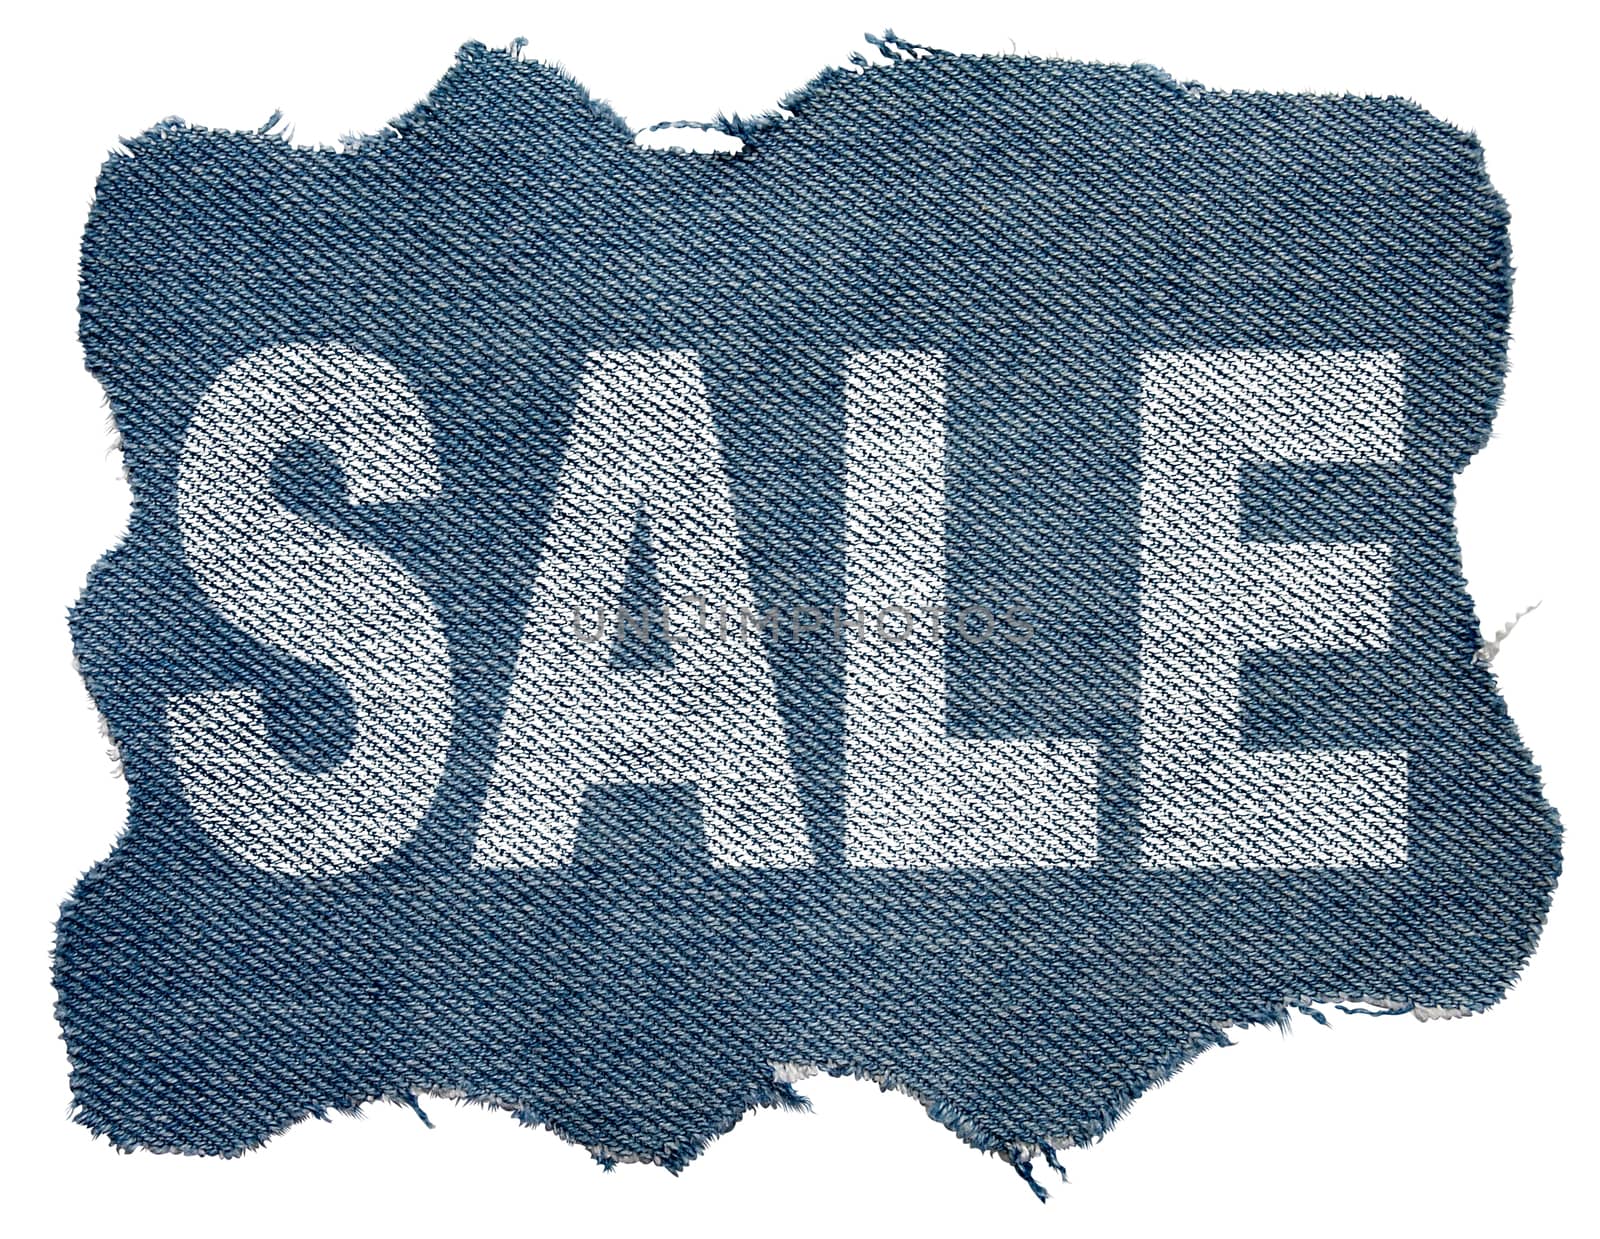 jeans label with word sale by Venakr